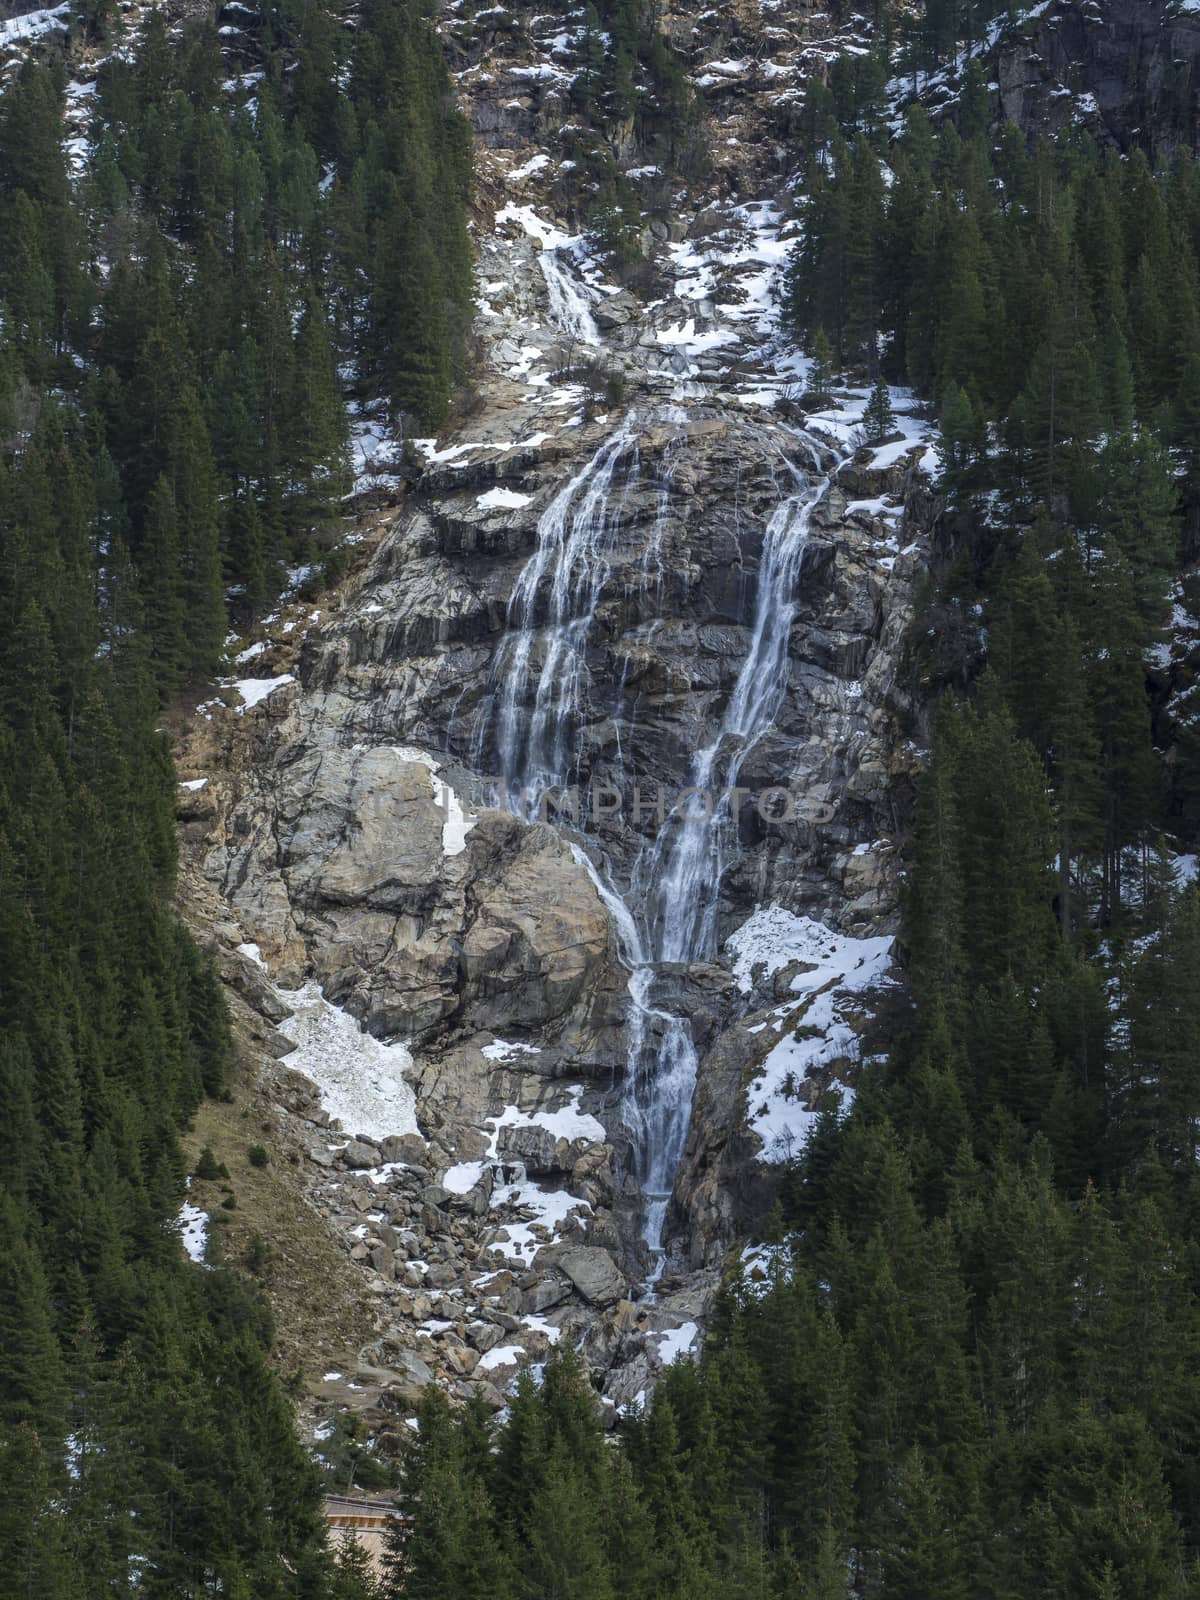 GRAWA Wasserfall Glacier Waterfall situated in Stubai Valley, Tyrol, Austria. Spring mountain river and trees landscape natural environment. Hiking in the alps